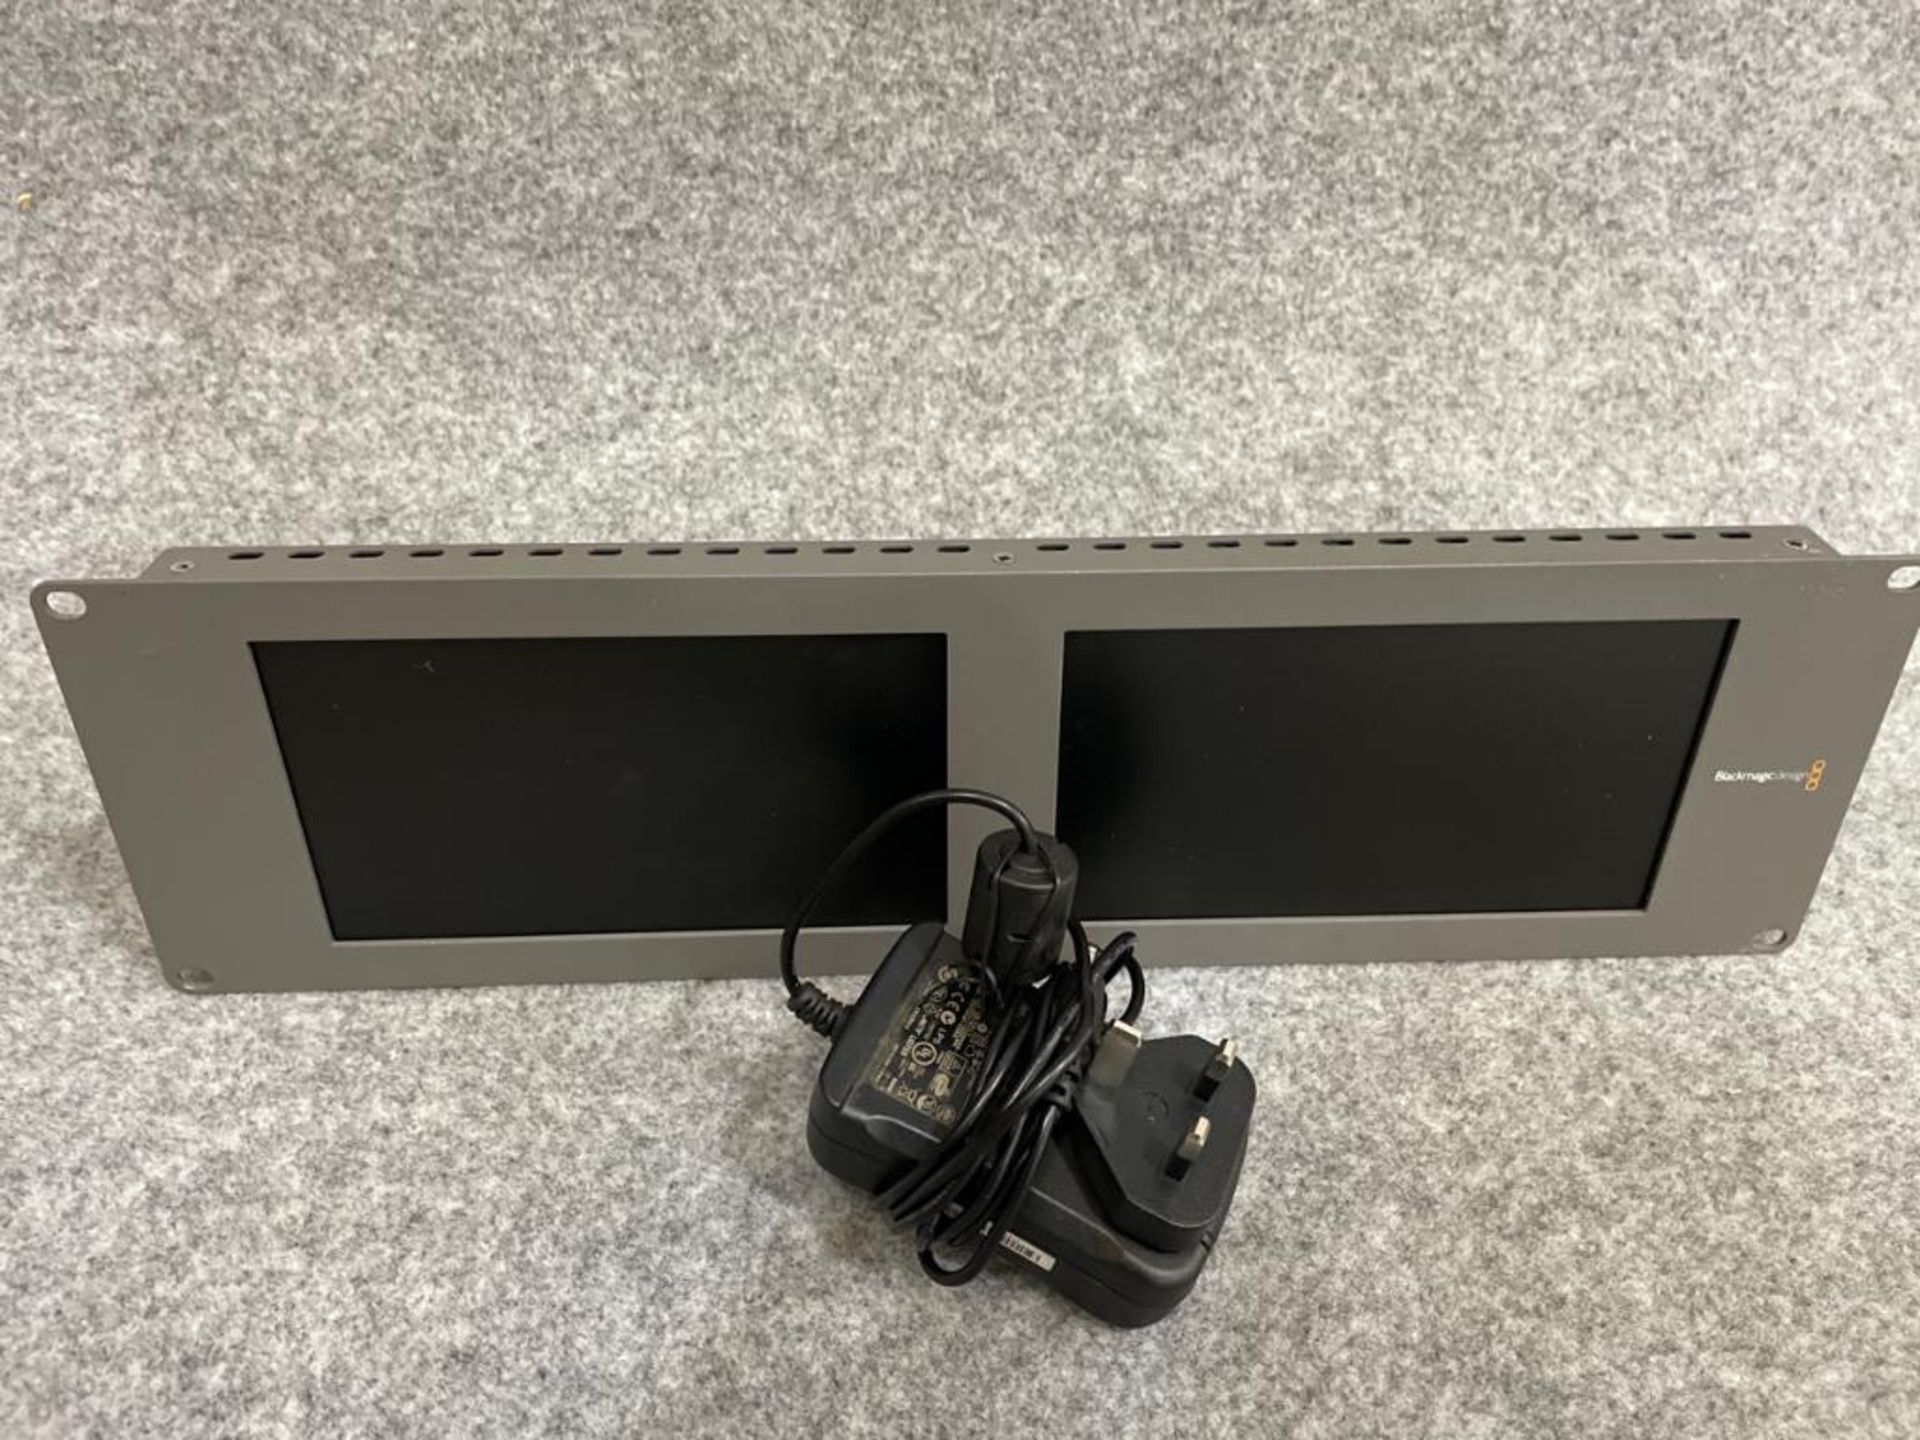 BlackMagic Dual HD Monitor with power supply SN: 1391429 - Image 3 of 3